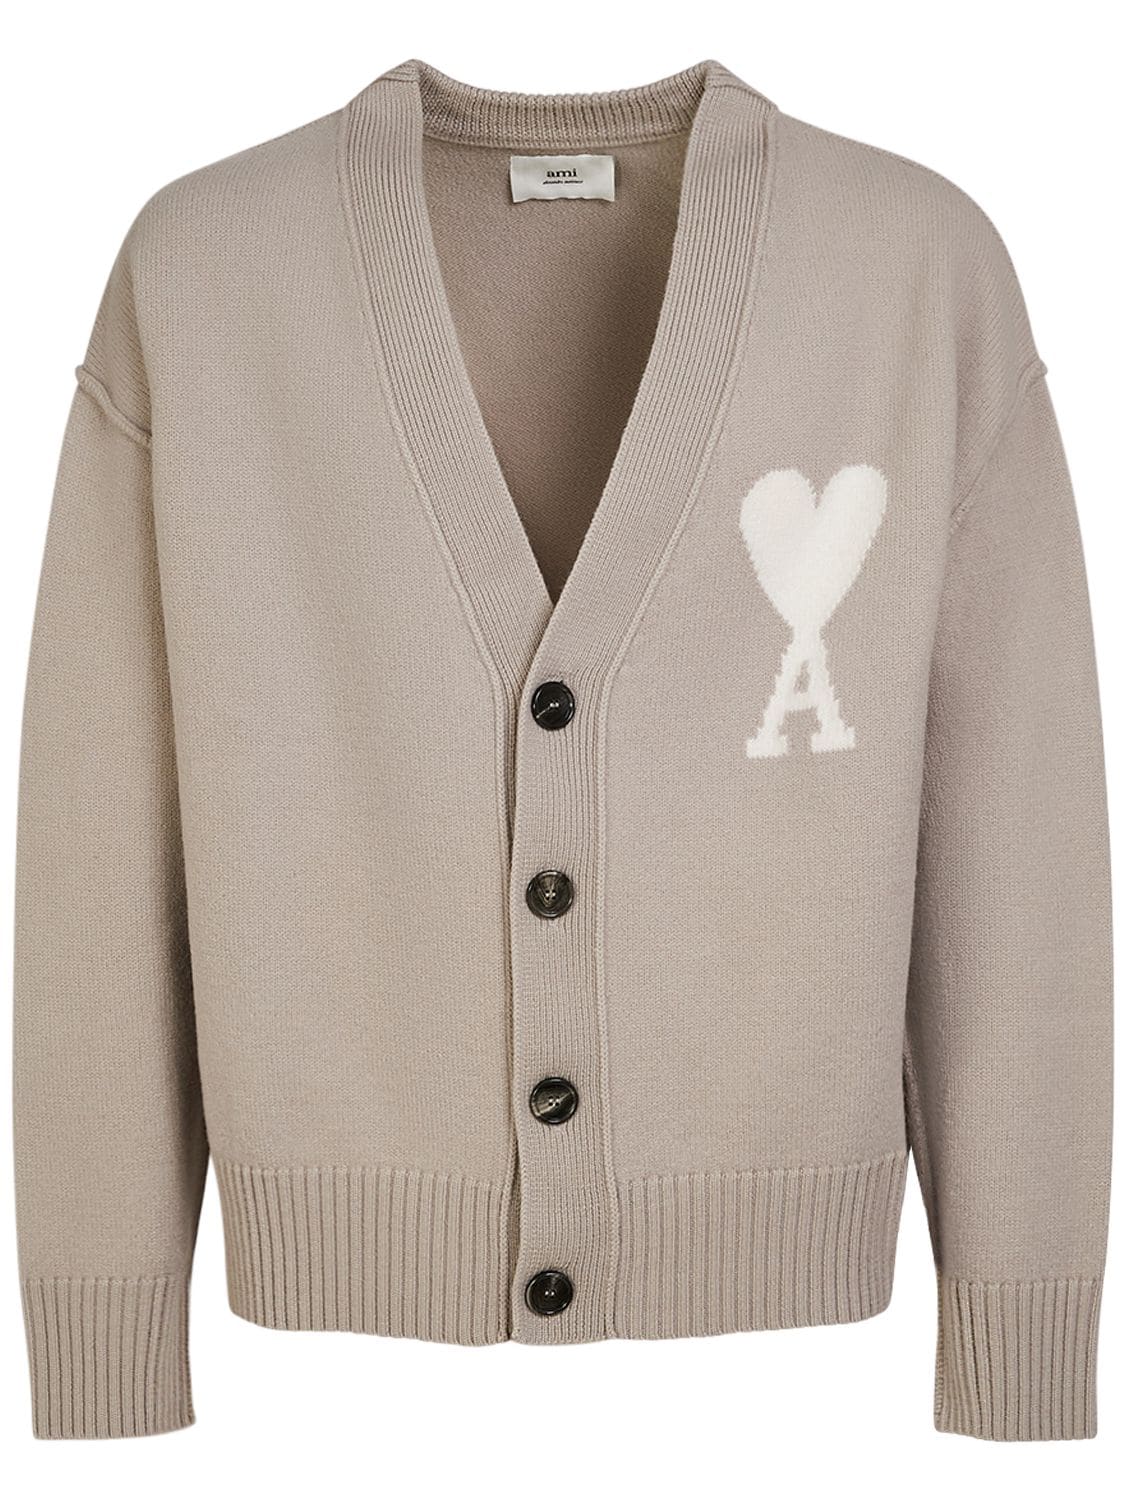 Image of Adc Felted Wool Cardigan